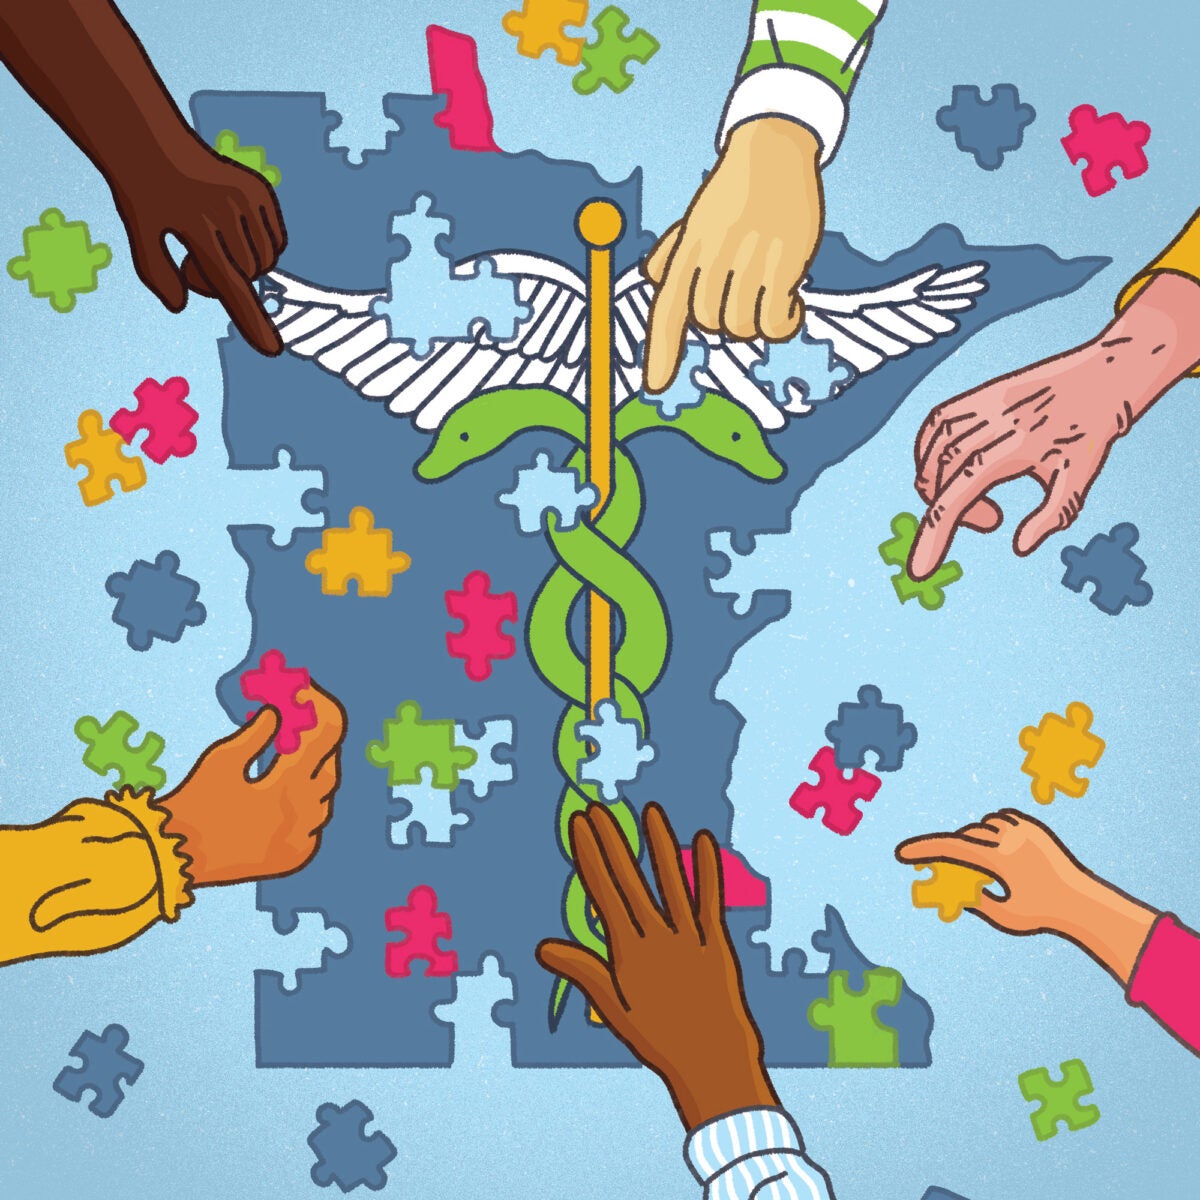 Illustration: Six different hands work to put together a puzzle in the shape of the state of Minnesota with the Medicaid caduceus at the center. The hands are different races and ages. The puzzle pieces are blue, pink, yellow and green.